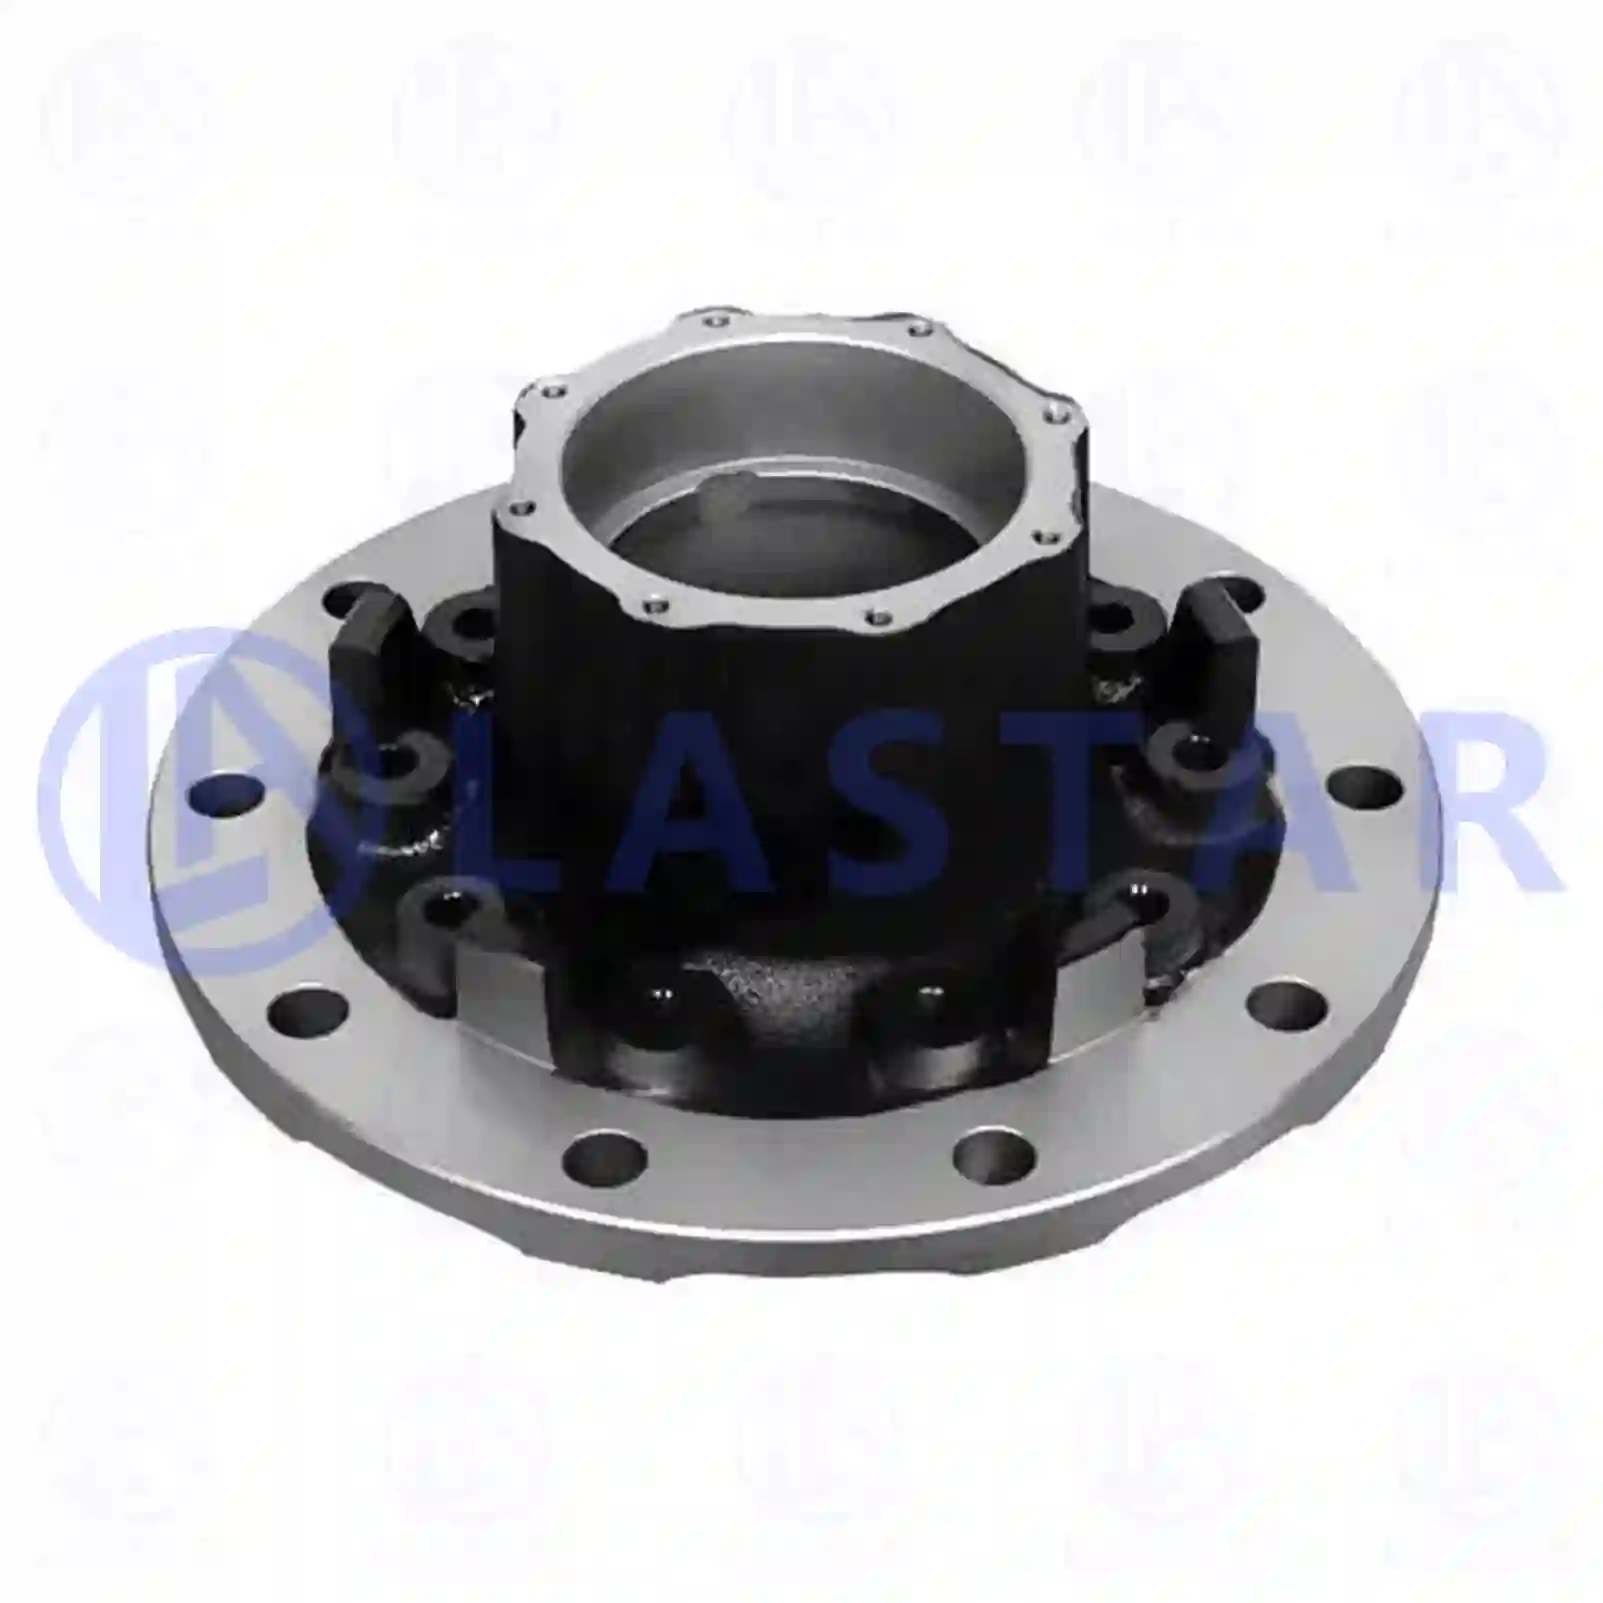 Wheel hub, without bearings, 77726334, 9463560101, 9463561301, , , , ||  77726334 Lastar Spare Part | Truck Spare Parts, Auotomotive Spare Parts Wheel hub, without bearings, 77726334, 9463560101, 9463561301, , , , ||  77726334 Lastar Spare Part | Truck Spare Parts, Auotomotive Spare Parts